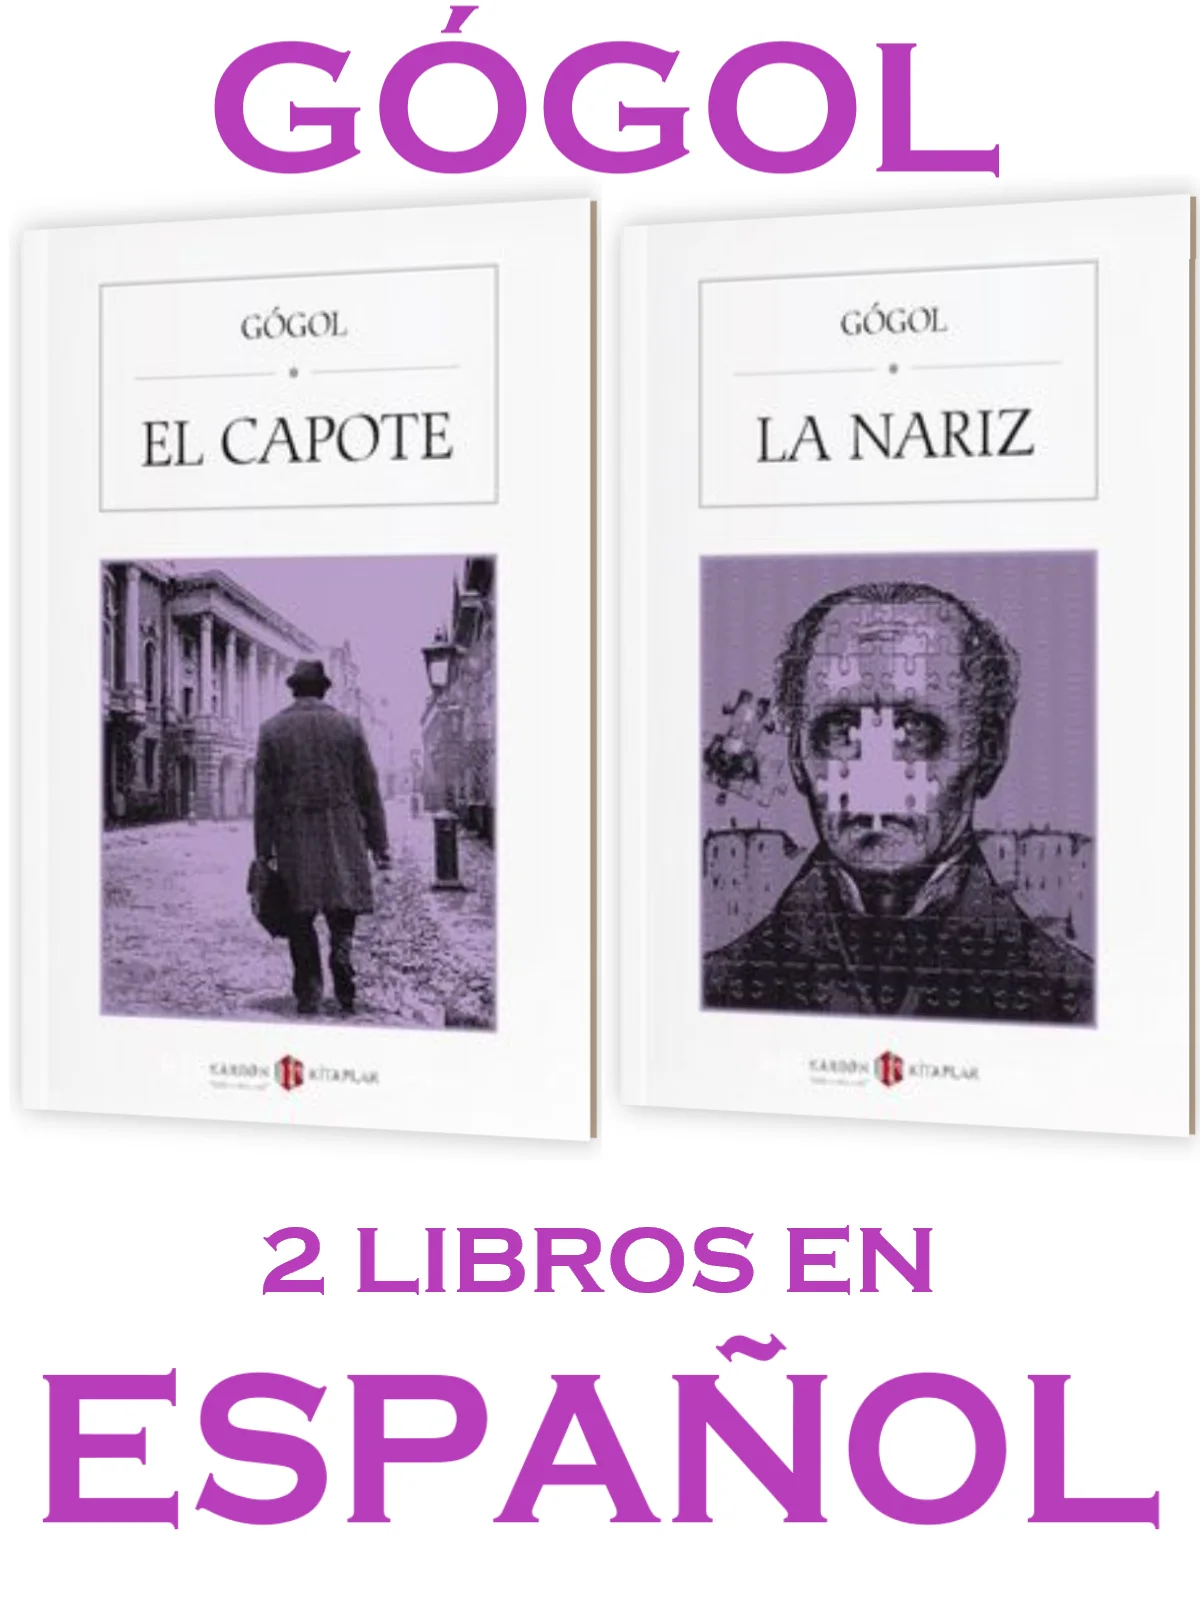 

CAPOTE & LA NARIZ Nikolai Vasilievich Gogol 2 books in Spanish classical world literature nice gift for Spanish students or friends from Spain, Mexico and Latin America